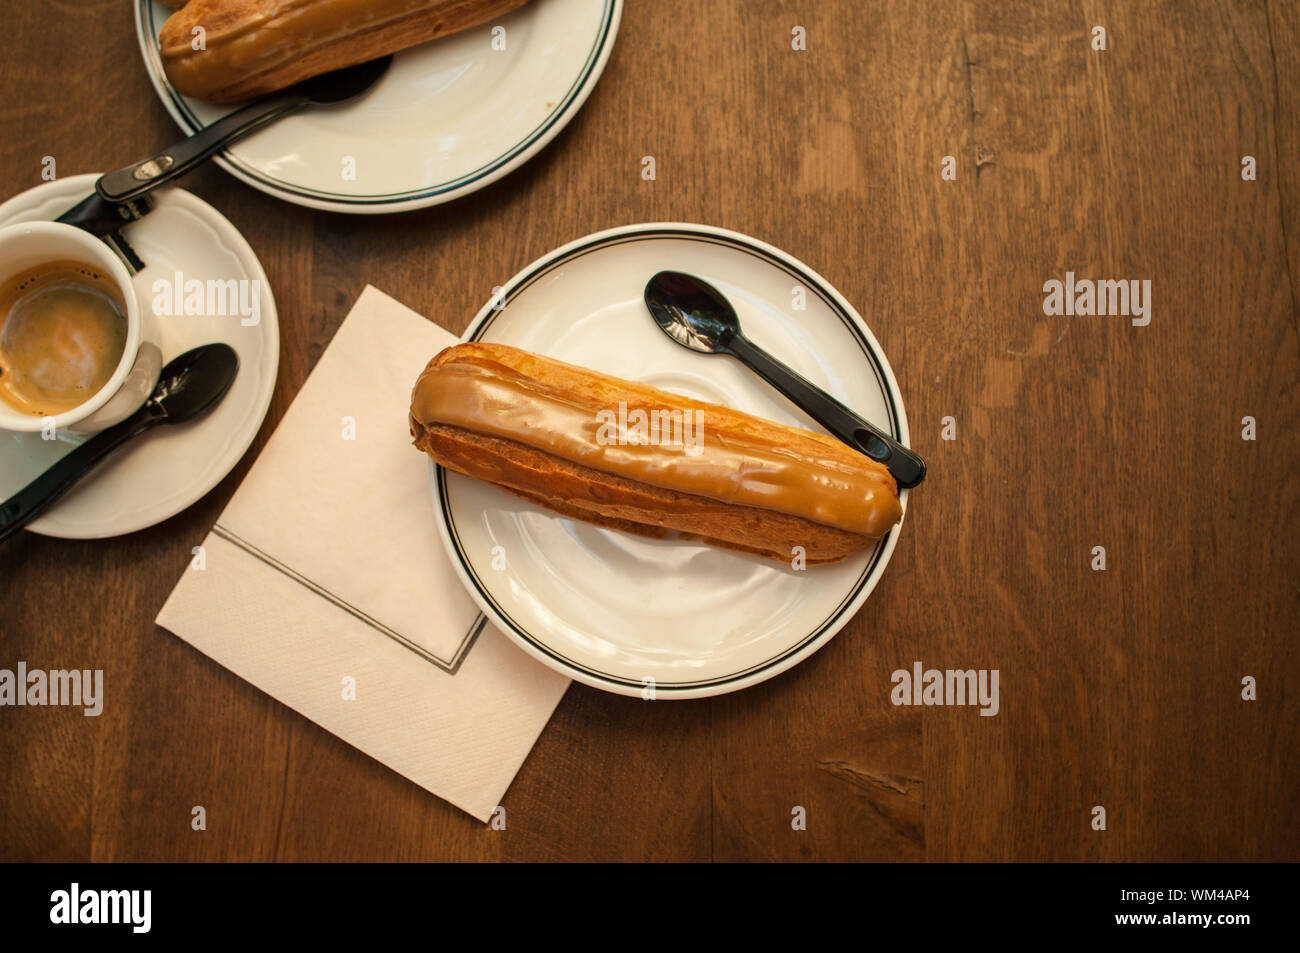 High Angle View Of Eclair In Plate On Wooden Table Stock Photo